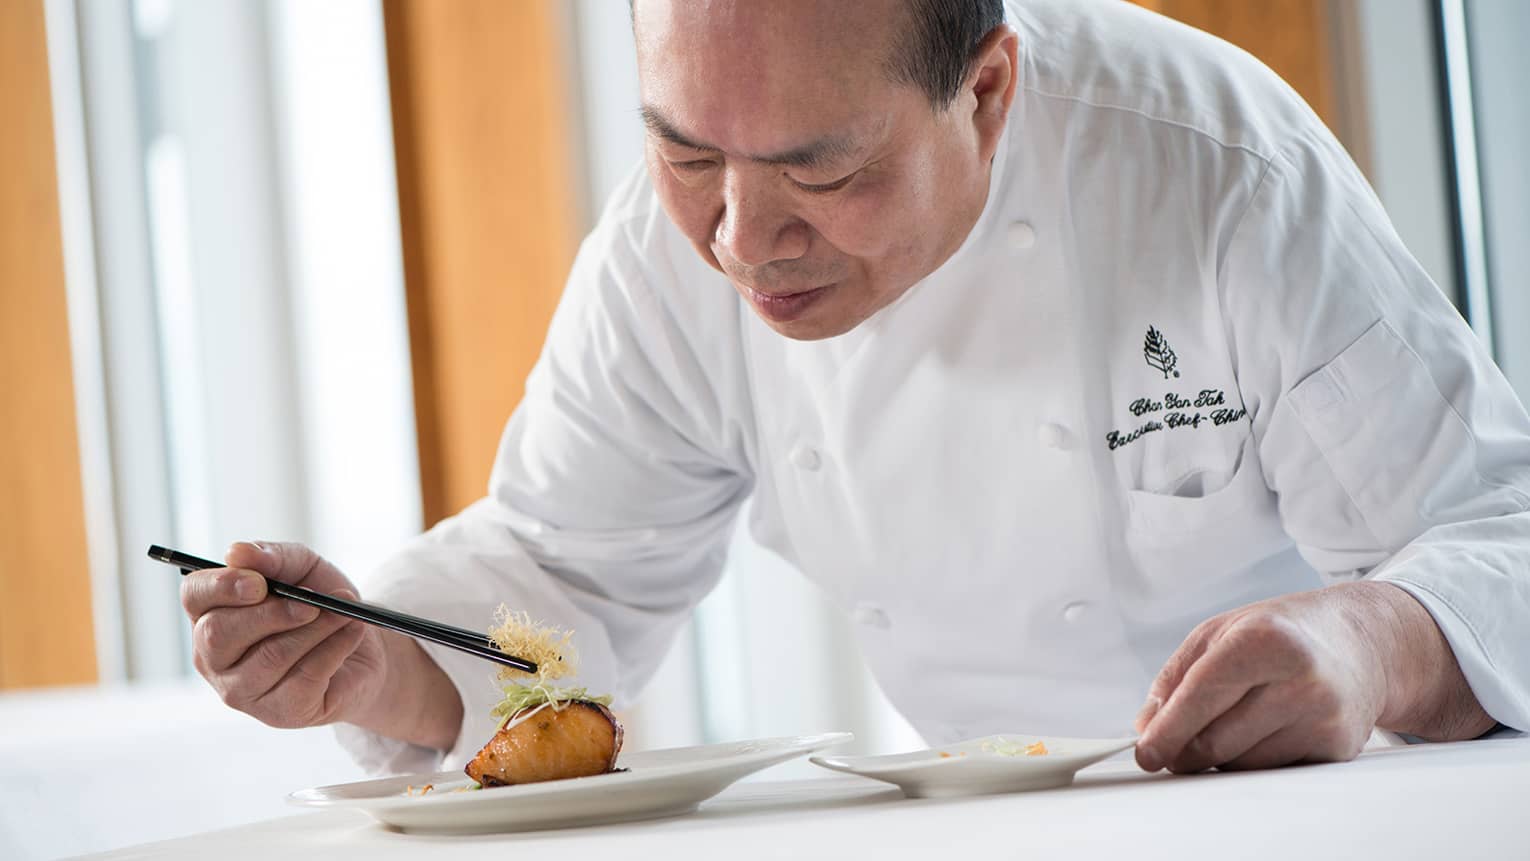 Chef in white uniform leans over grilled salmon dish on plate, adds garnish with chopsticks